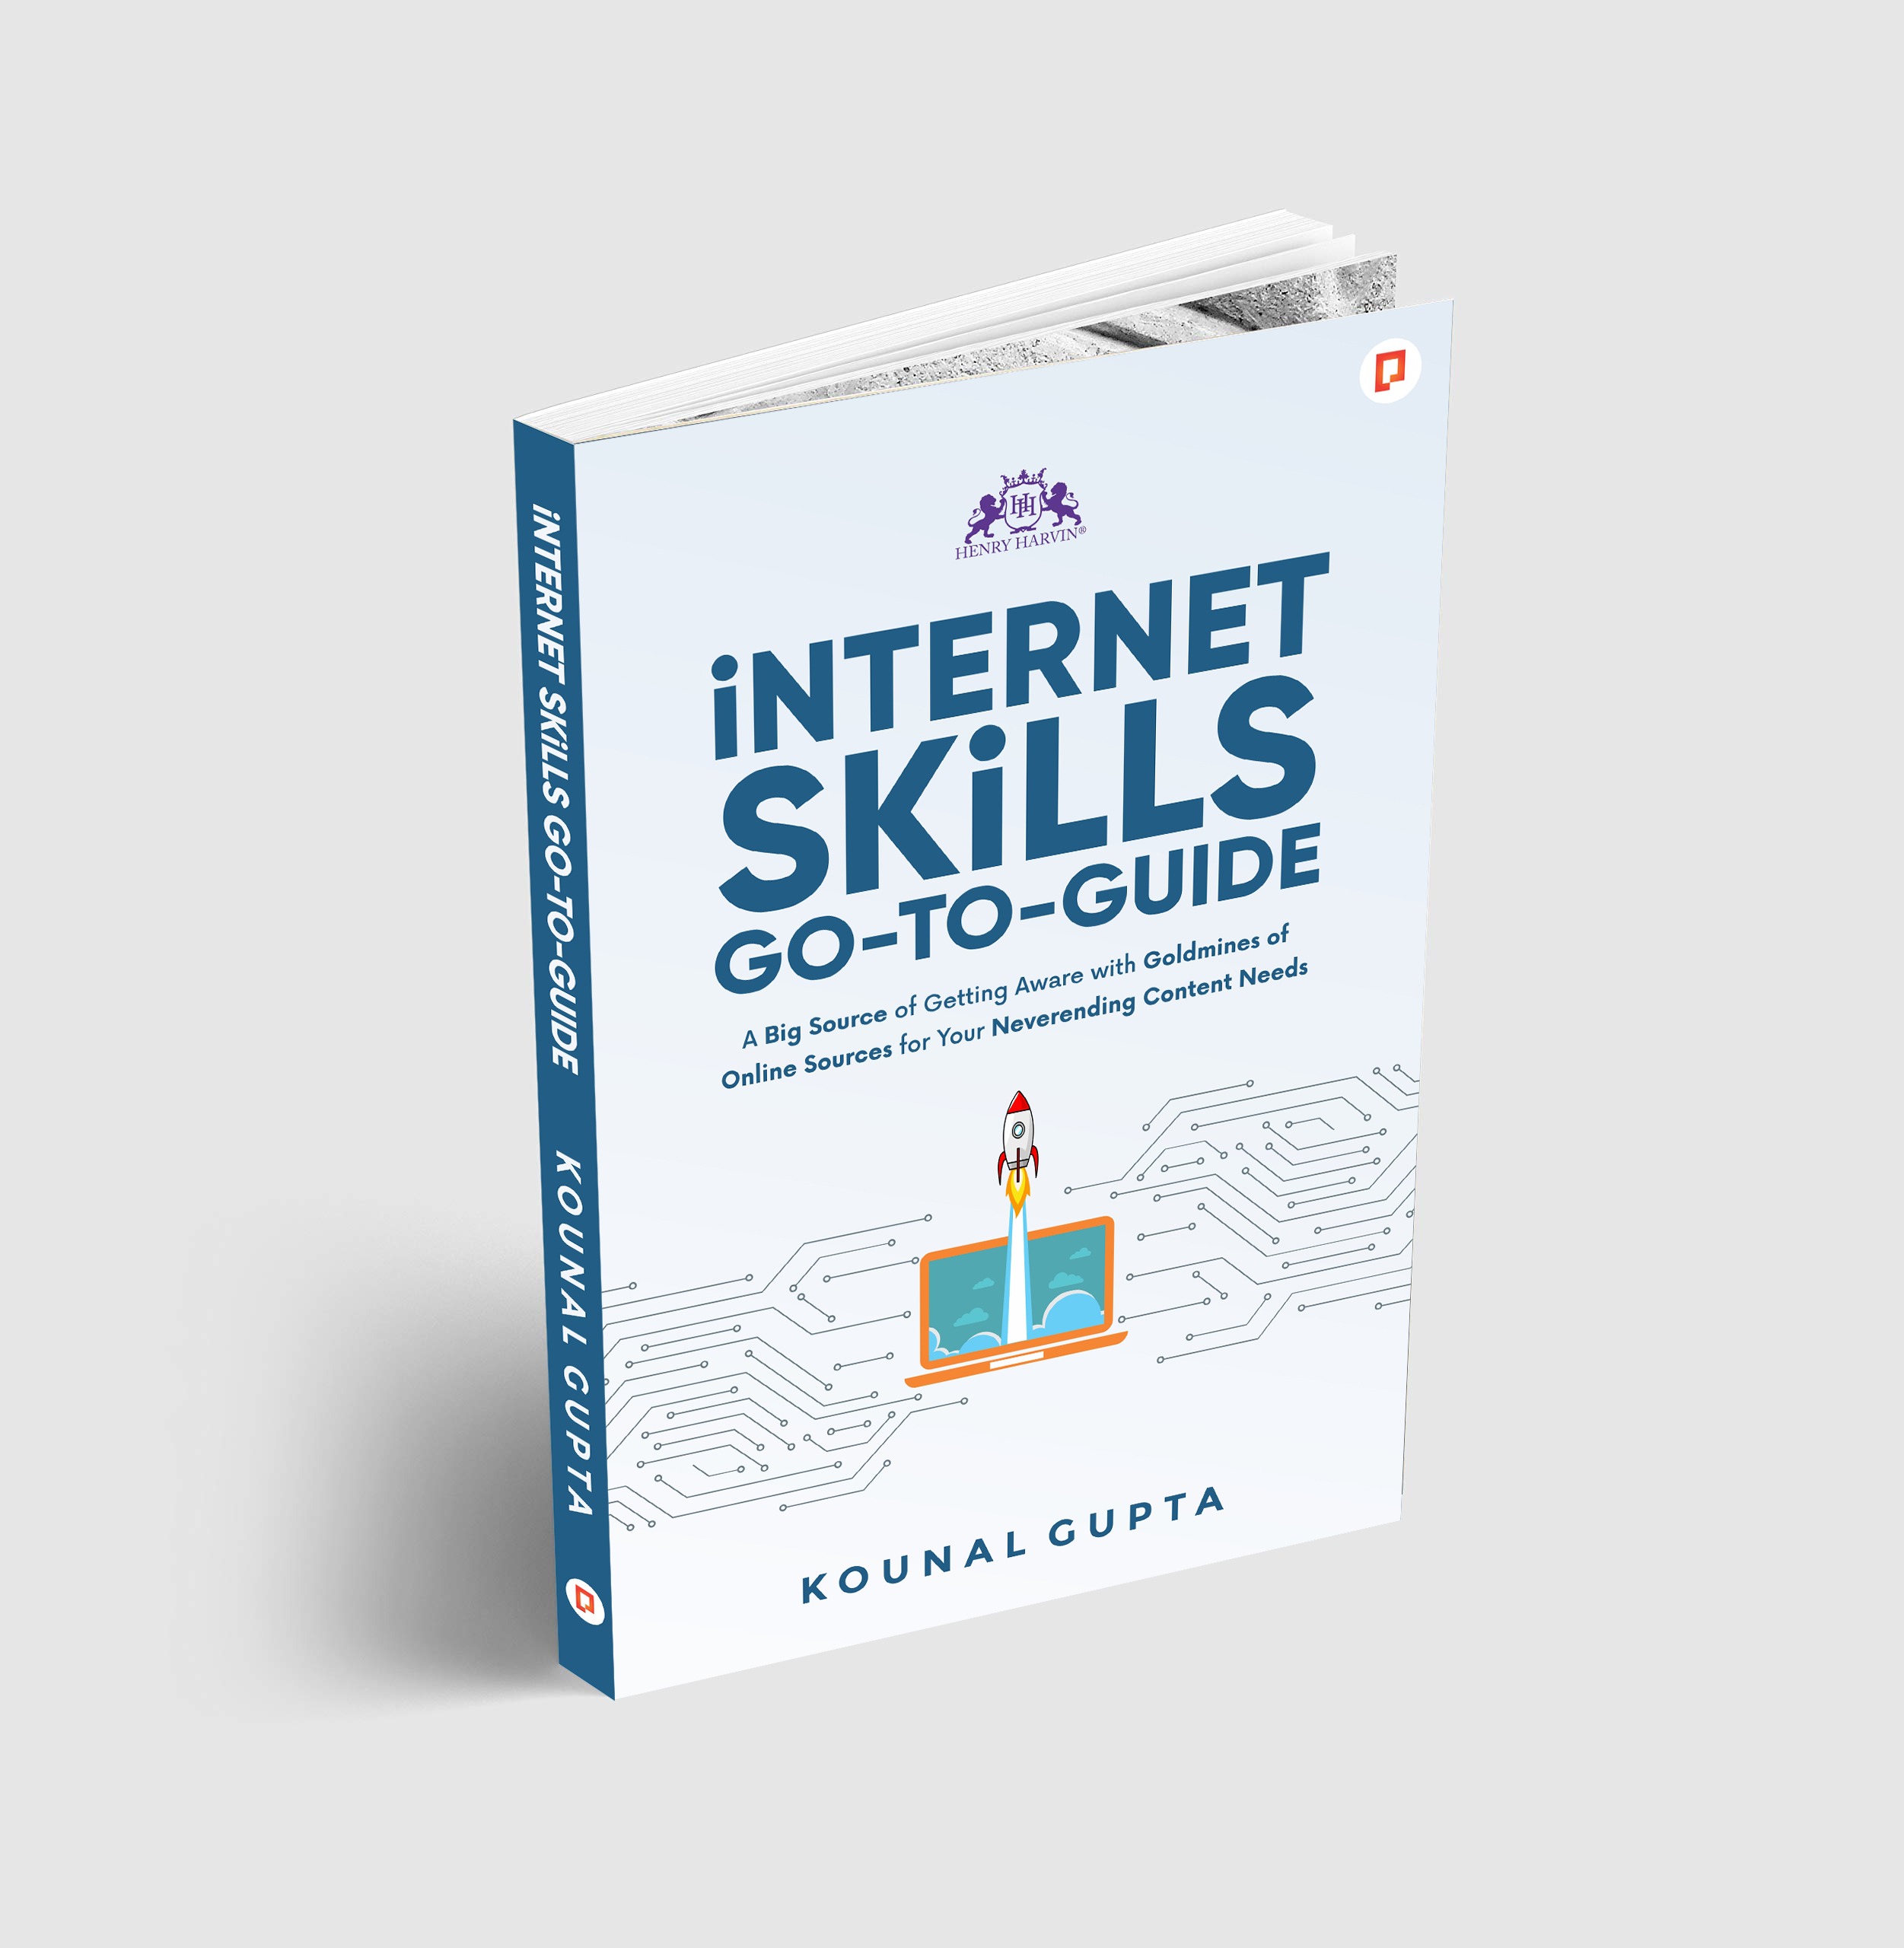 This FREE Book is the biggest Guide in The Network where you can